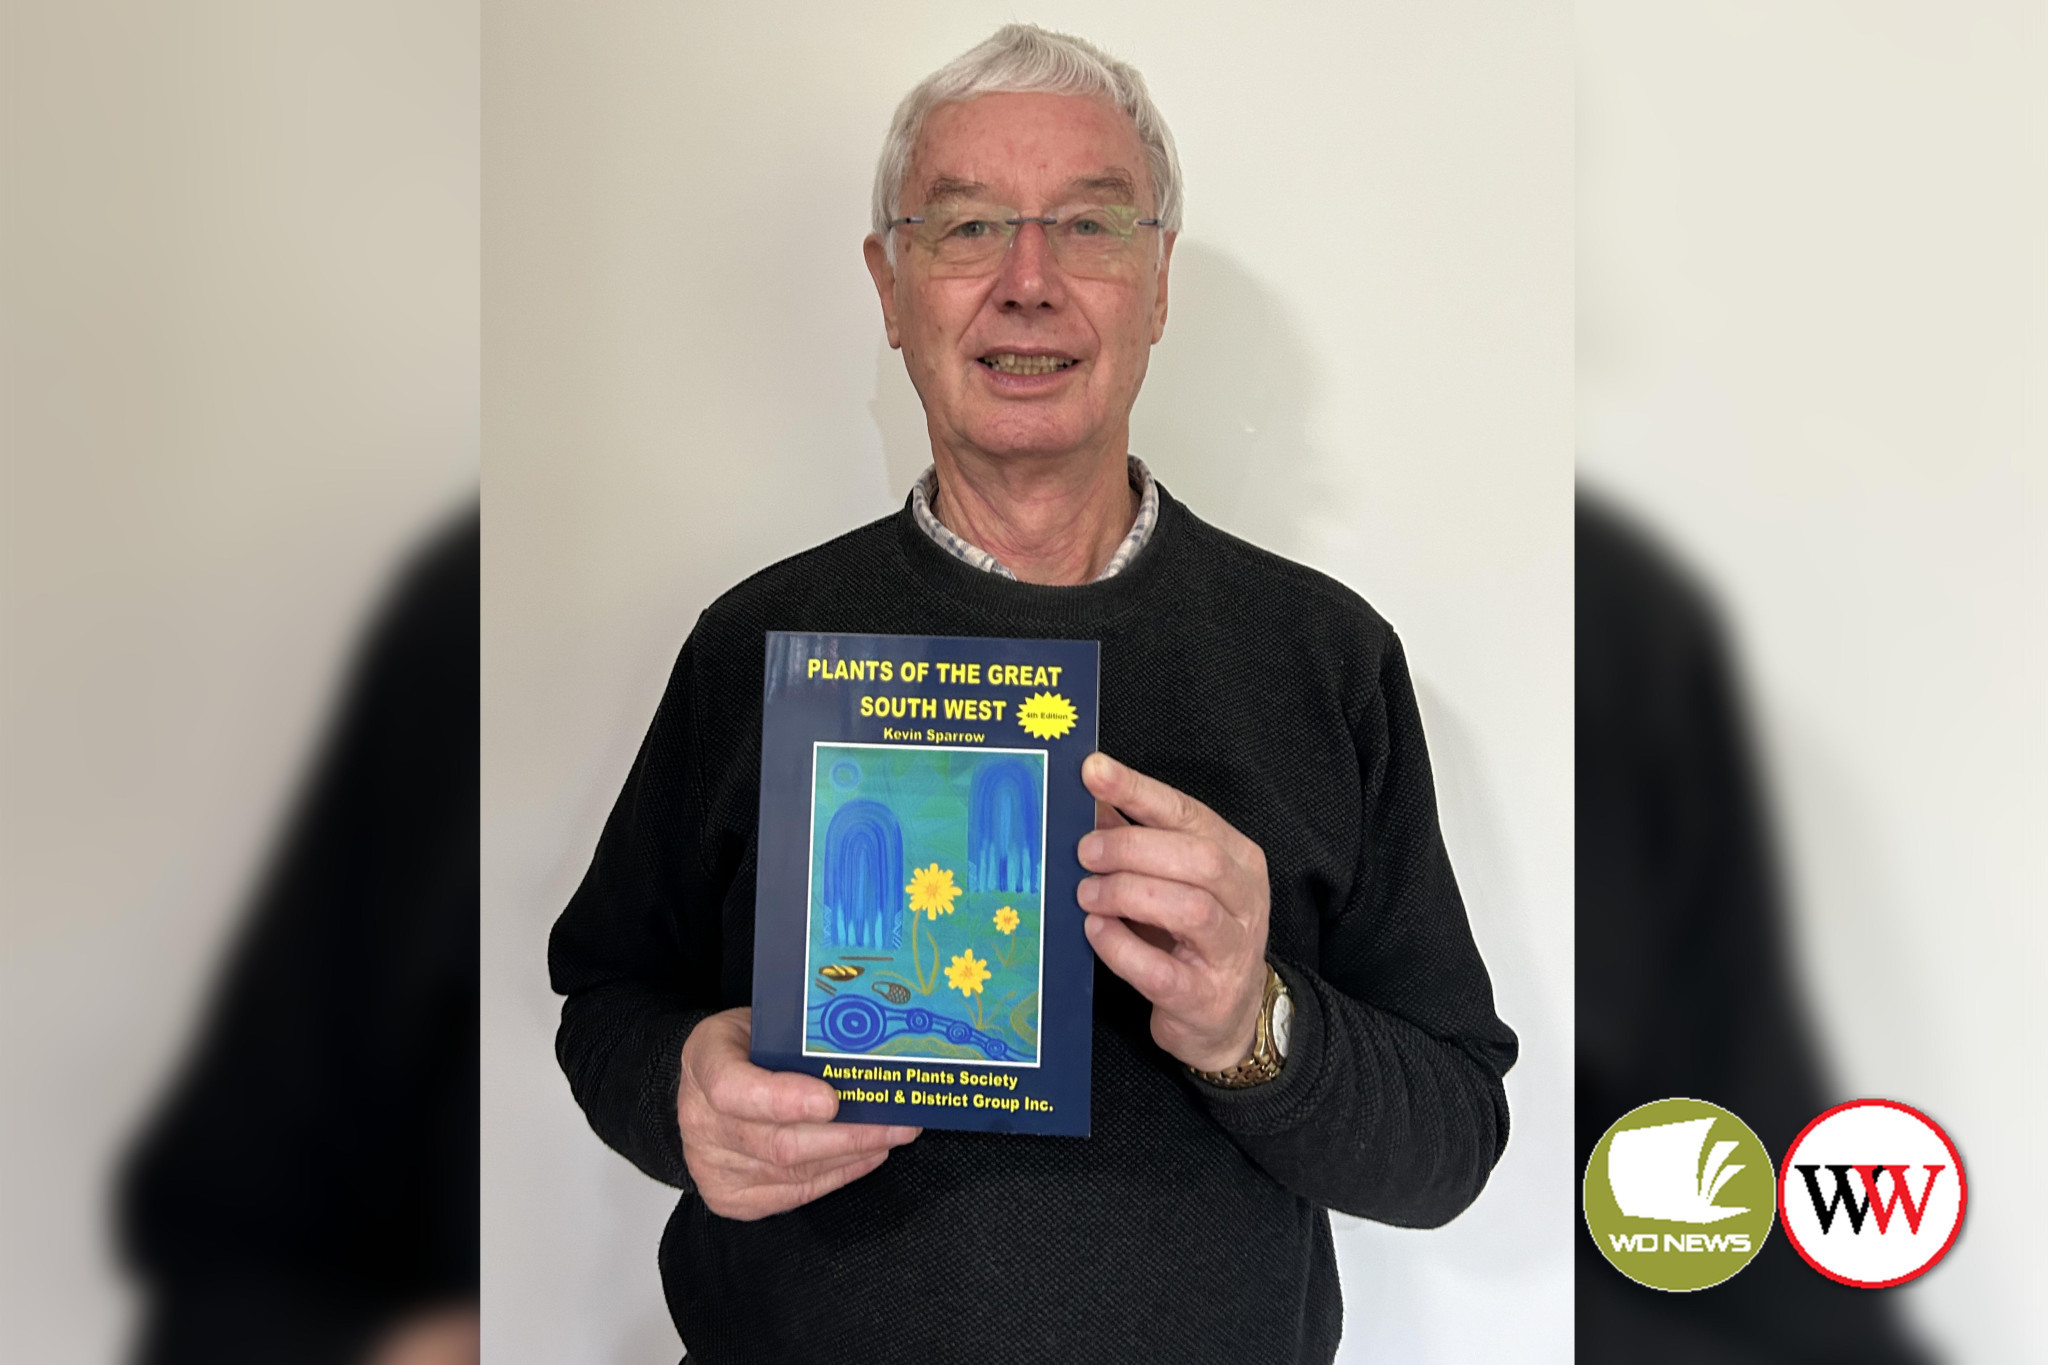 Author of ‘Plants of the Great South West’ Kevin Sparrow launched the book’s fourth edition in Warrnambool last week